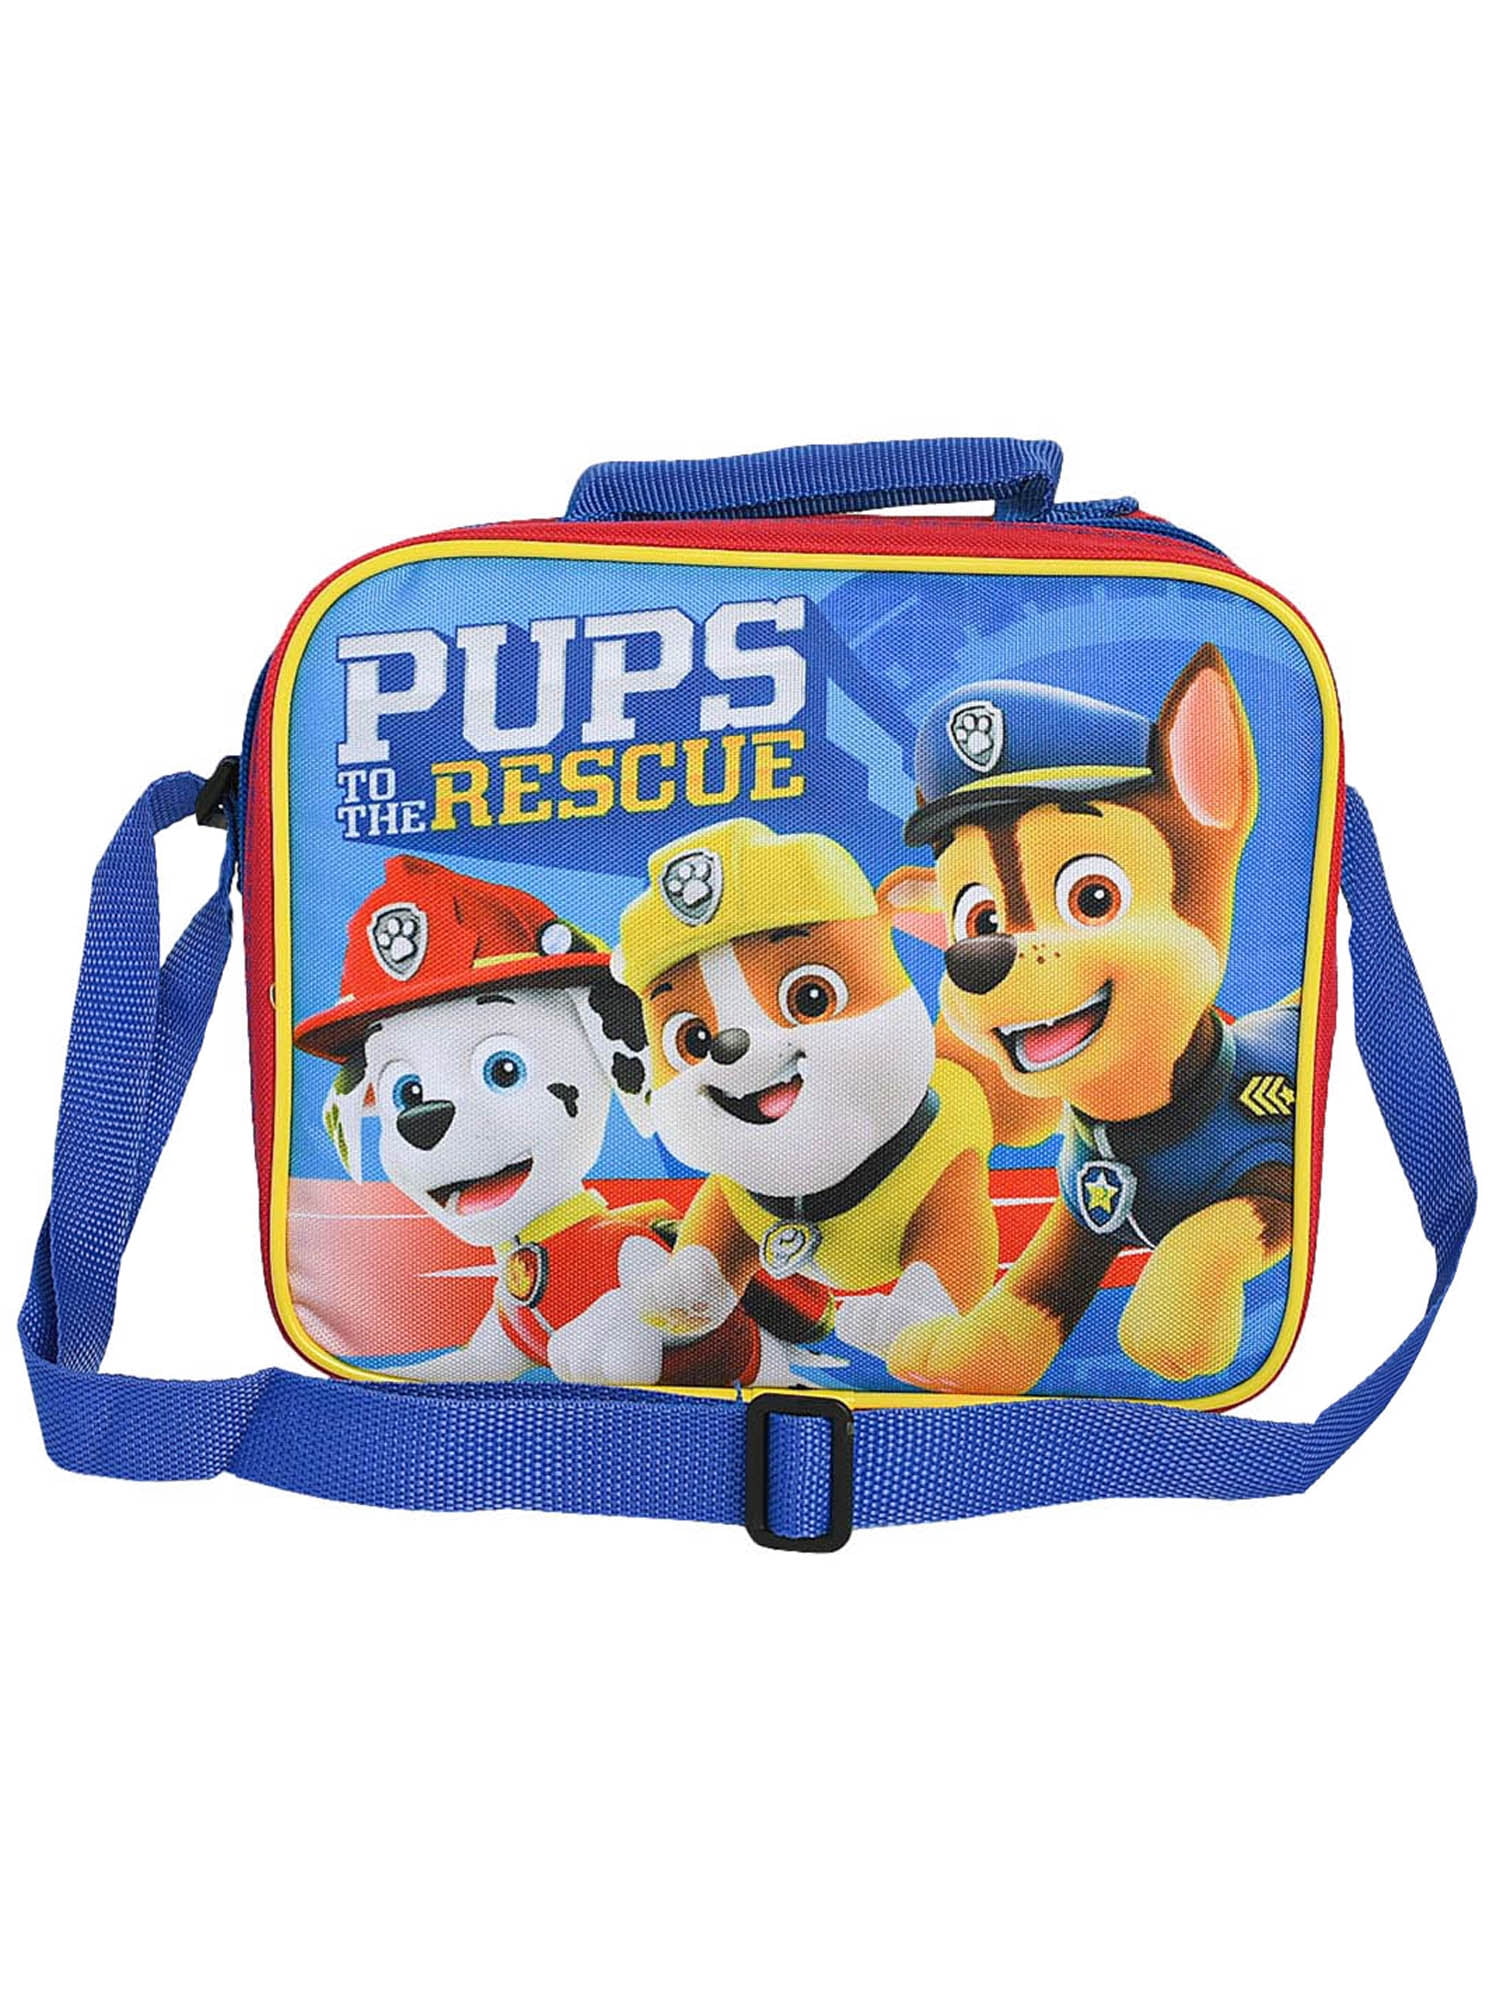 1x Paw Patrol Chase Marshall Insulated Lunch Bag with shoulder straps 